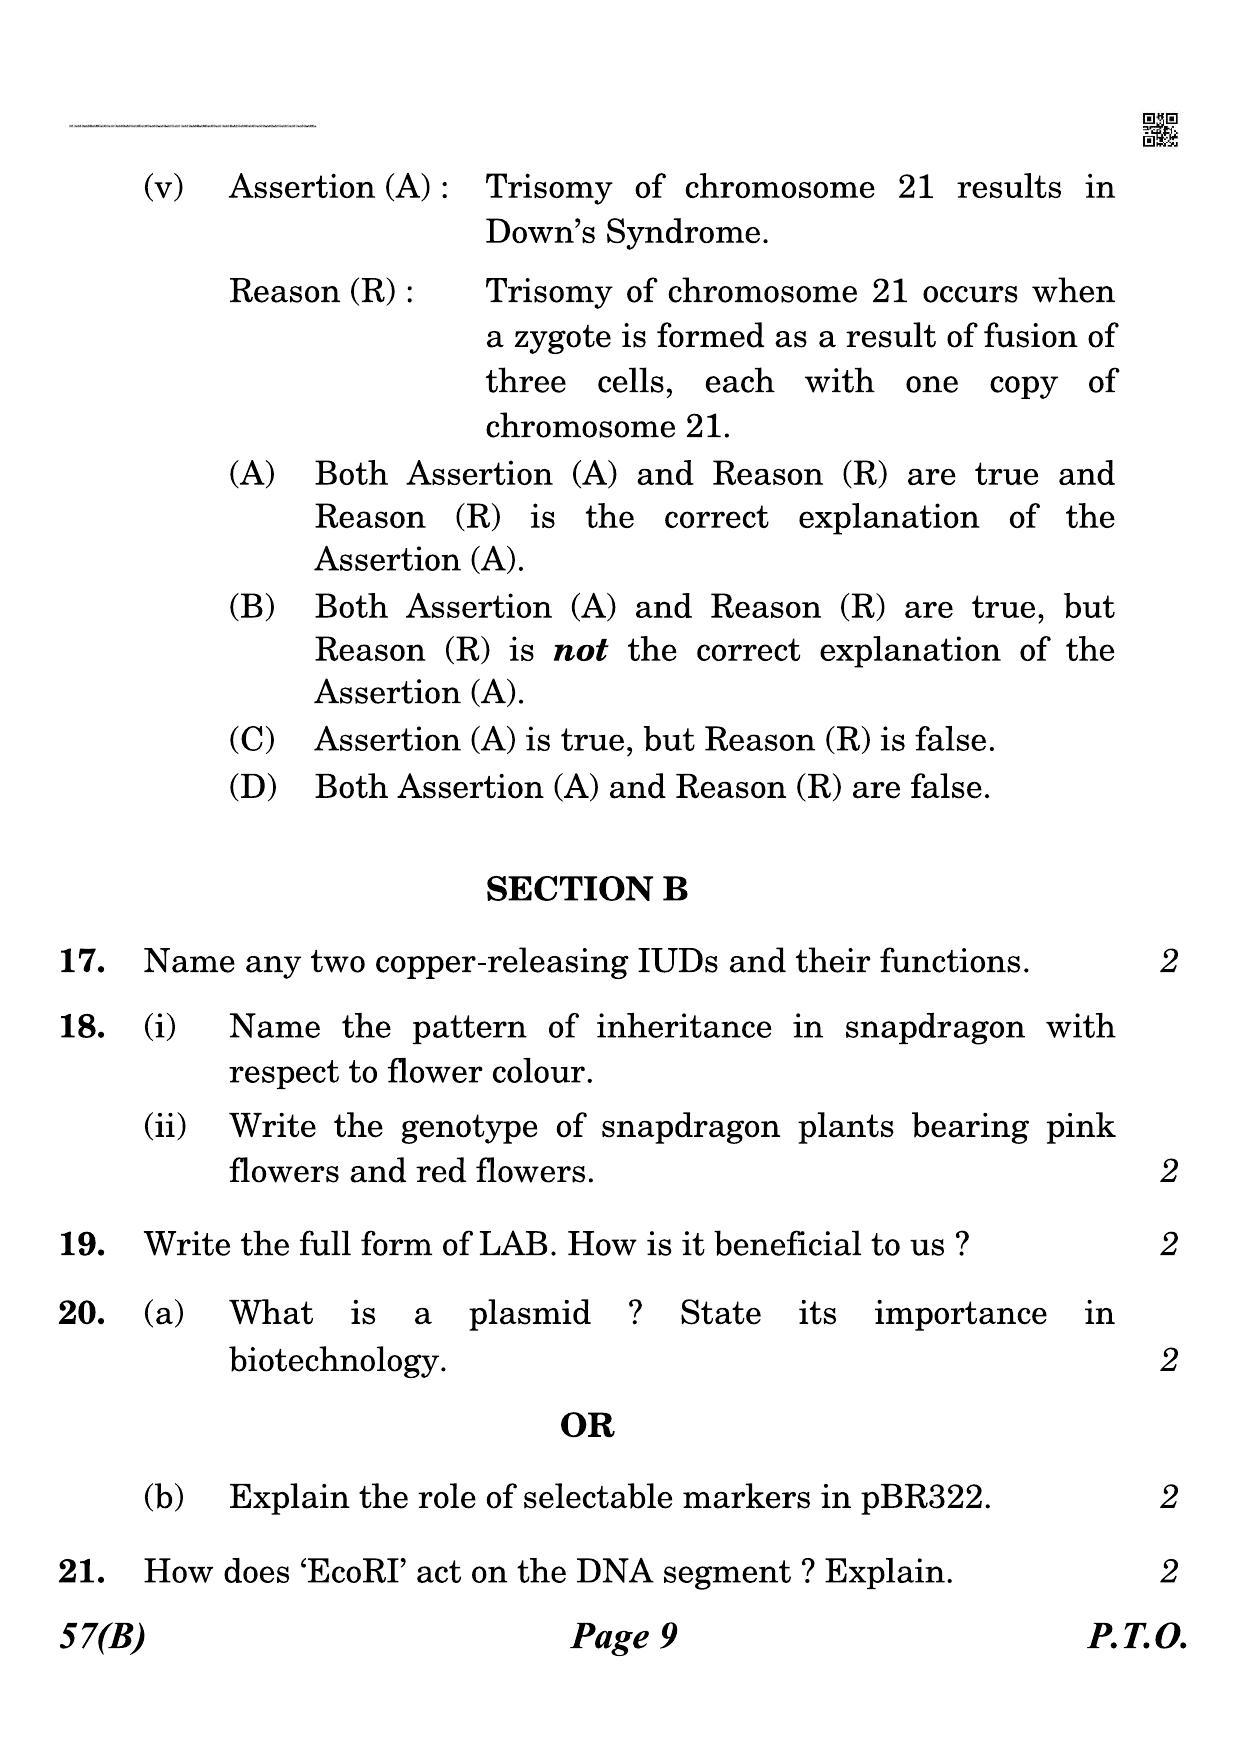 CBSE Class 12 QP_044_biology_for_visually_impared_candidates 2021 Compartment Question Paper - Page 9